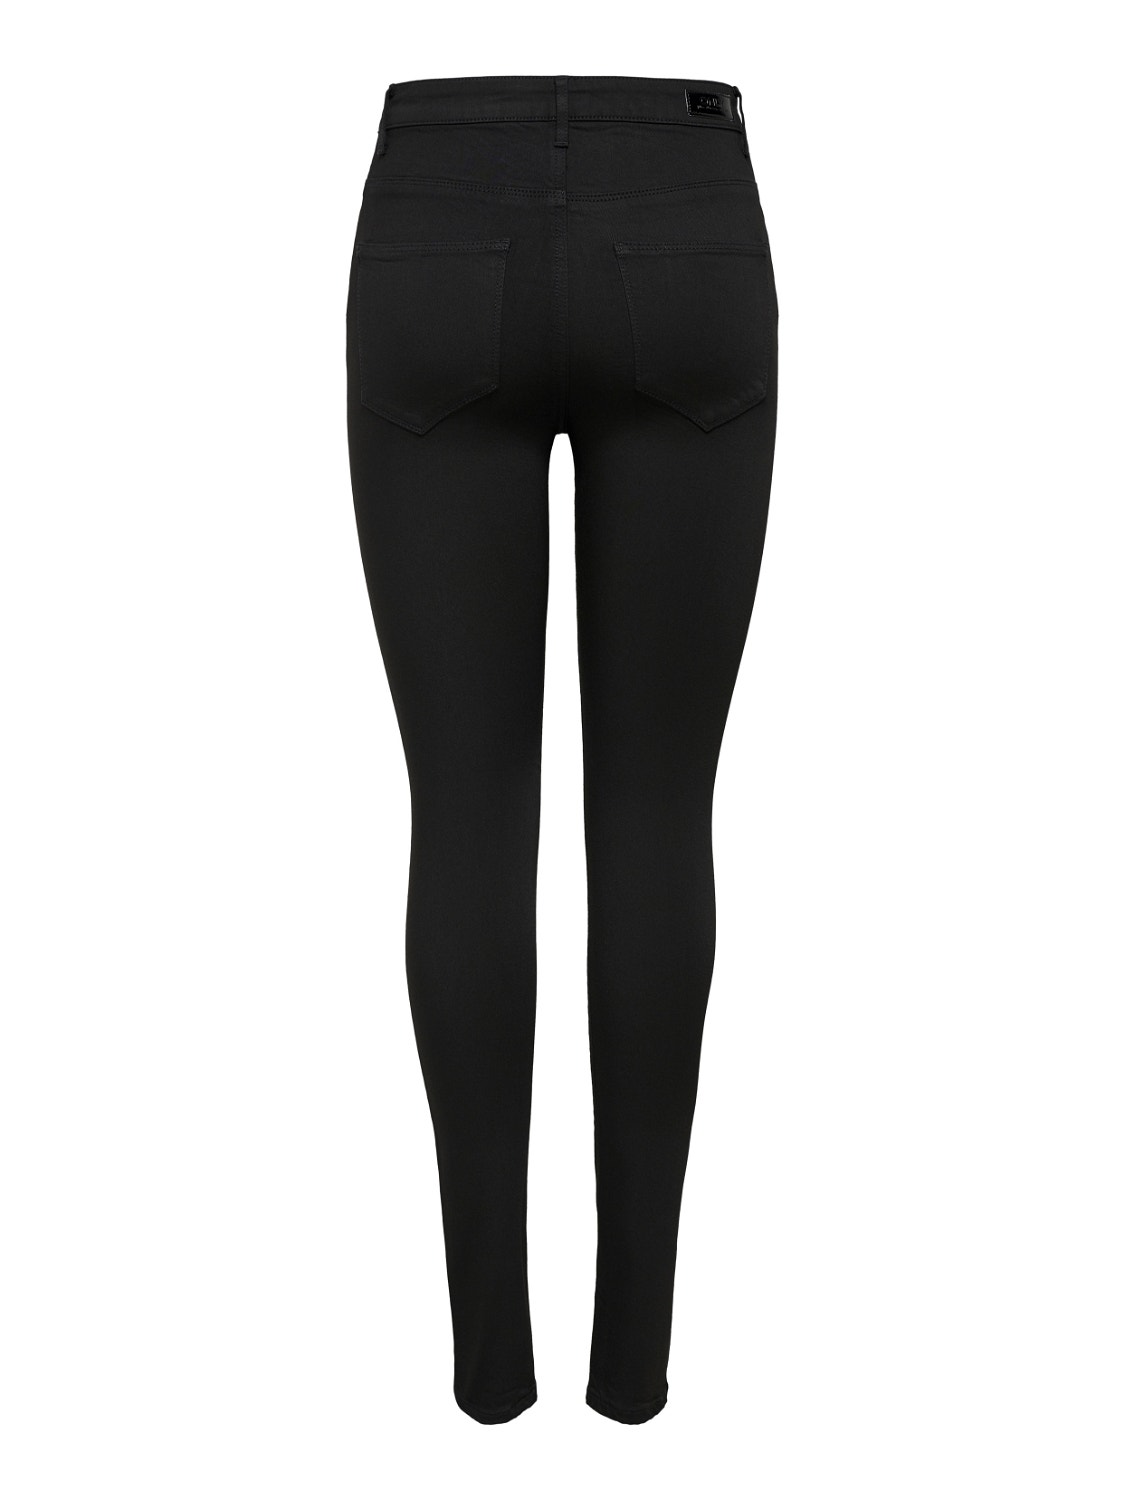 ONLY Jeans Skinny Fit Taille haute -Black Denim - 15184928